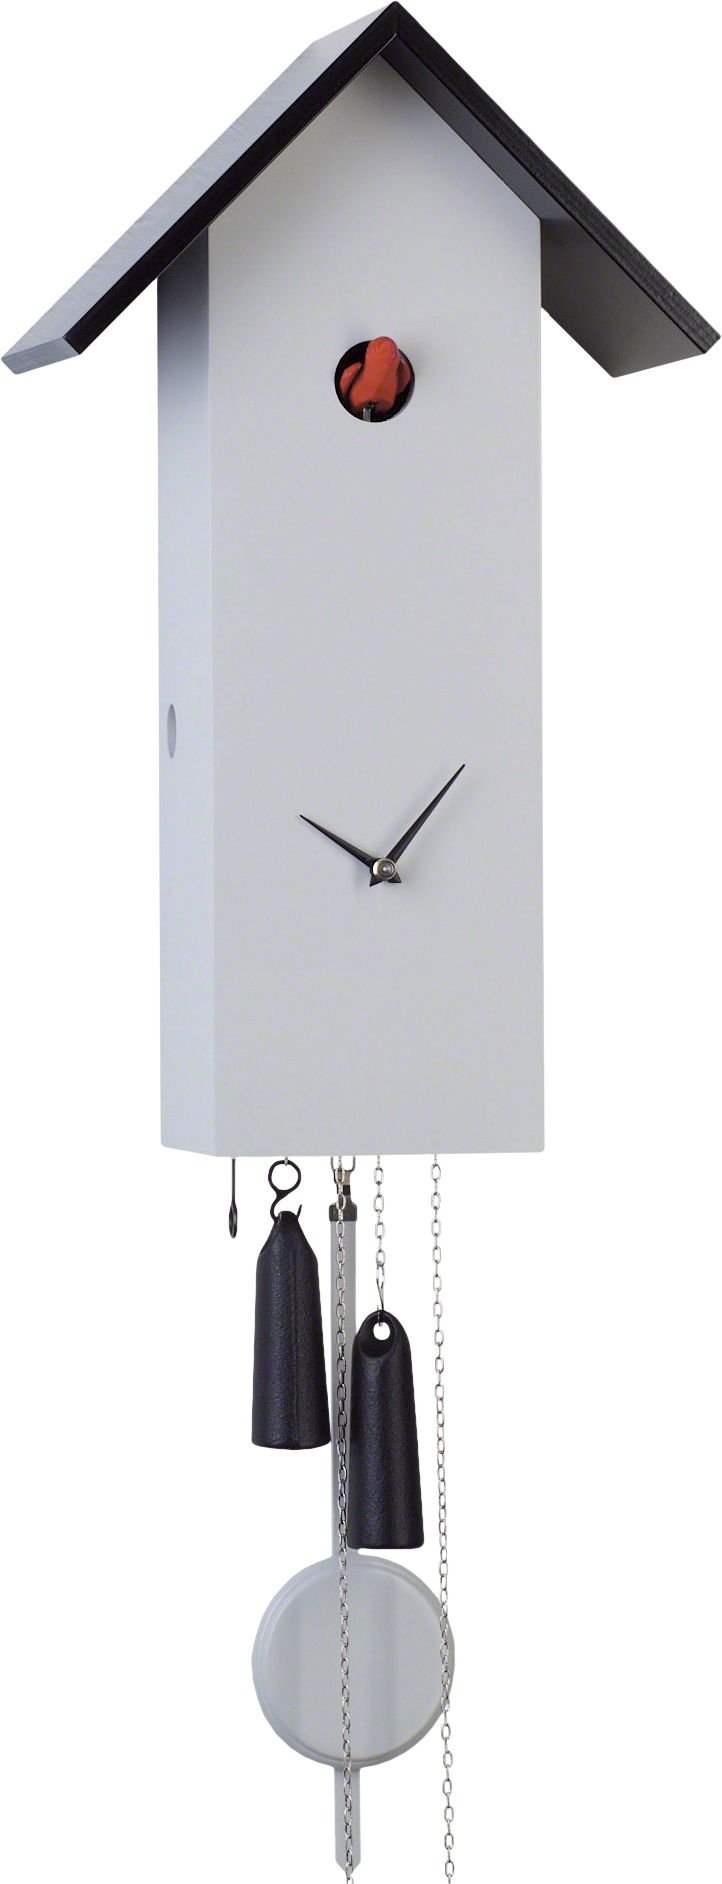 Cuckoo Clock Modern Art Style 8 Day Movement 41cm by Rombach & Haas